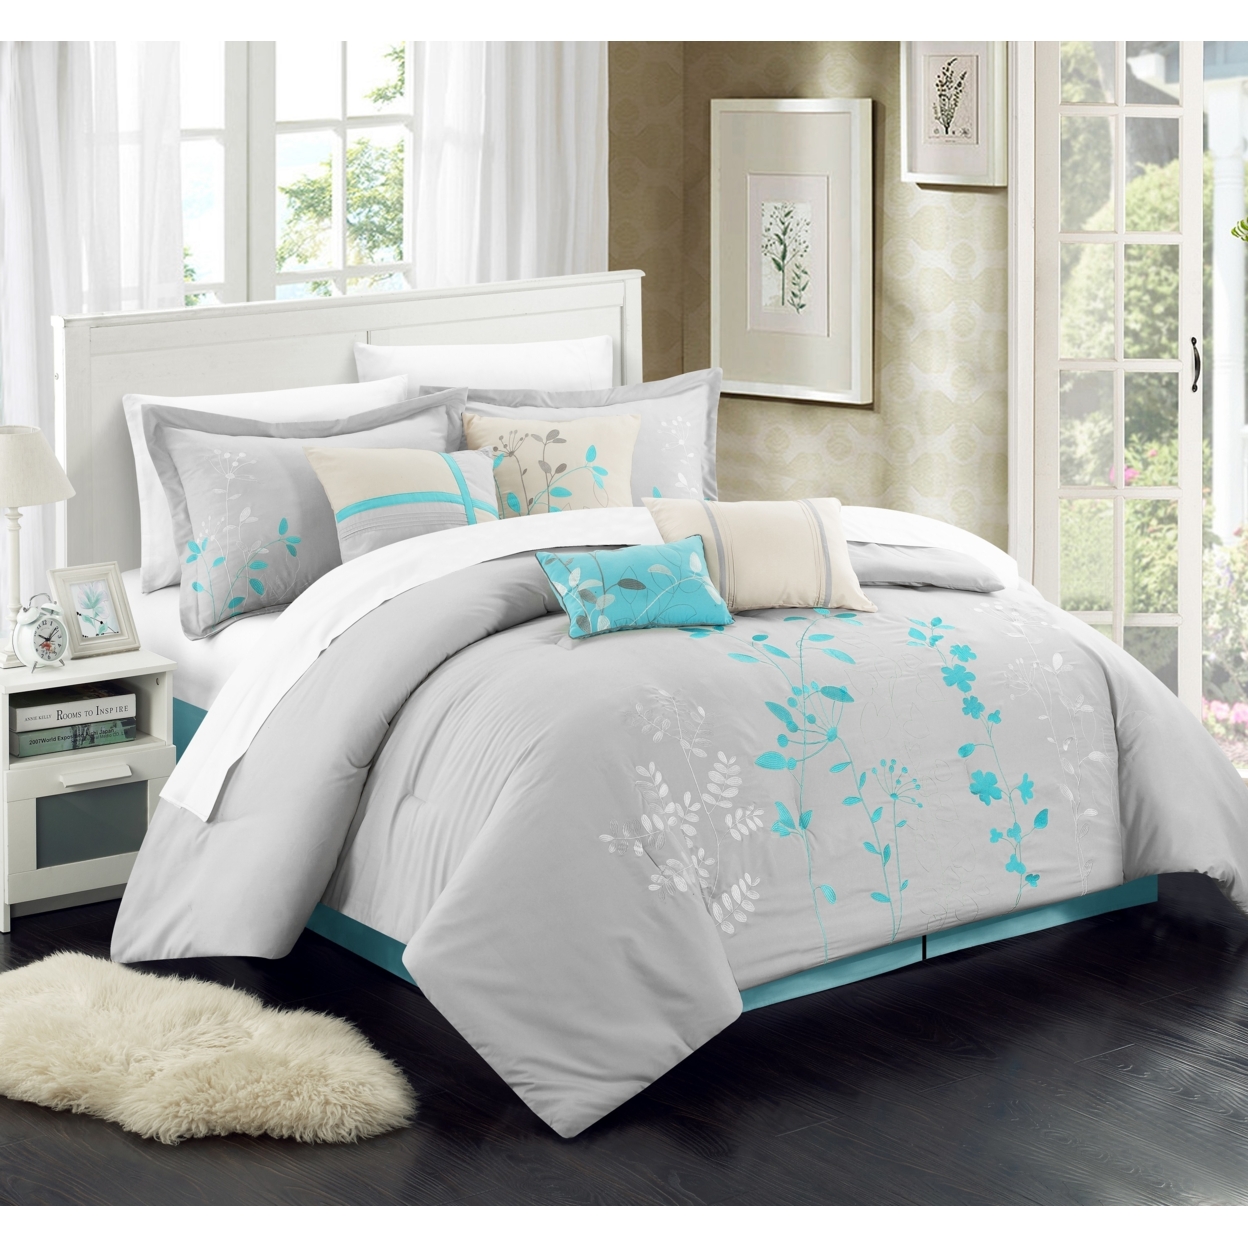 Brooke 8-Piece Embroidered Bed Comforter Set - Turquoise, King